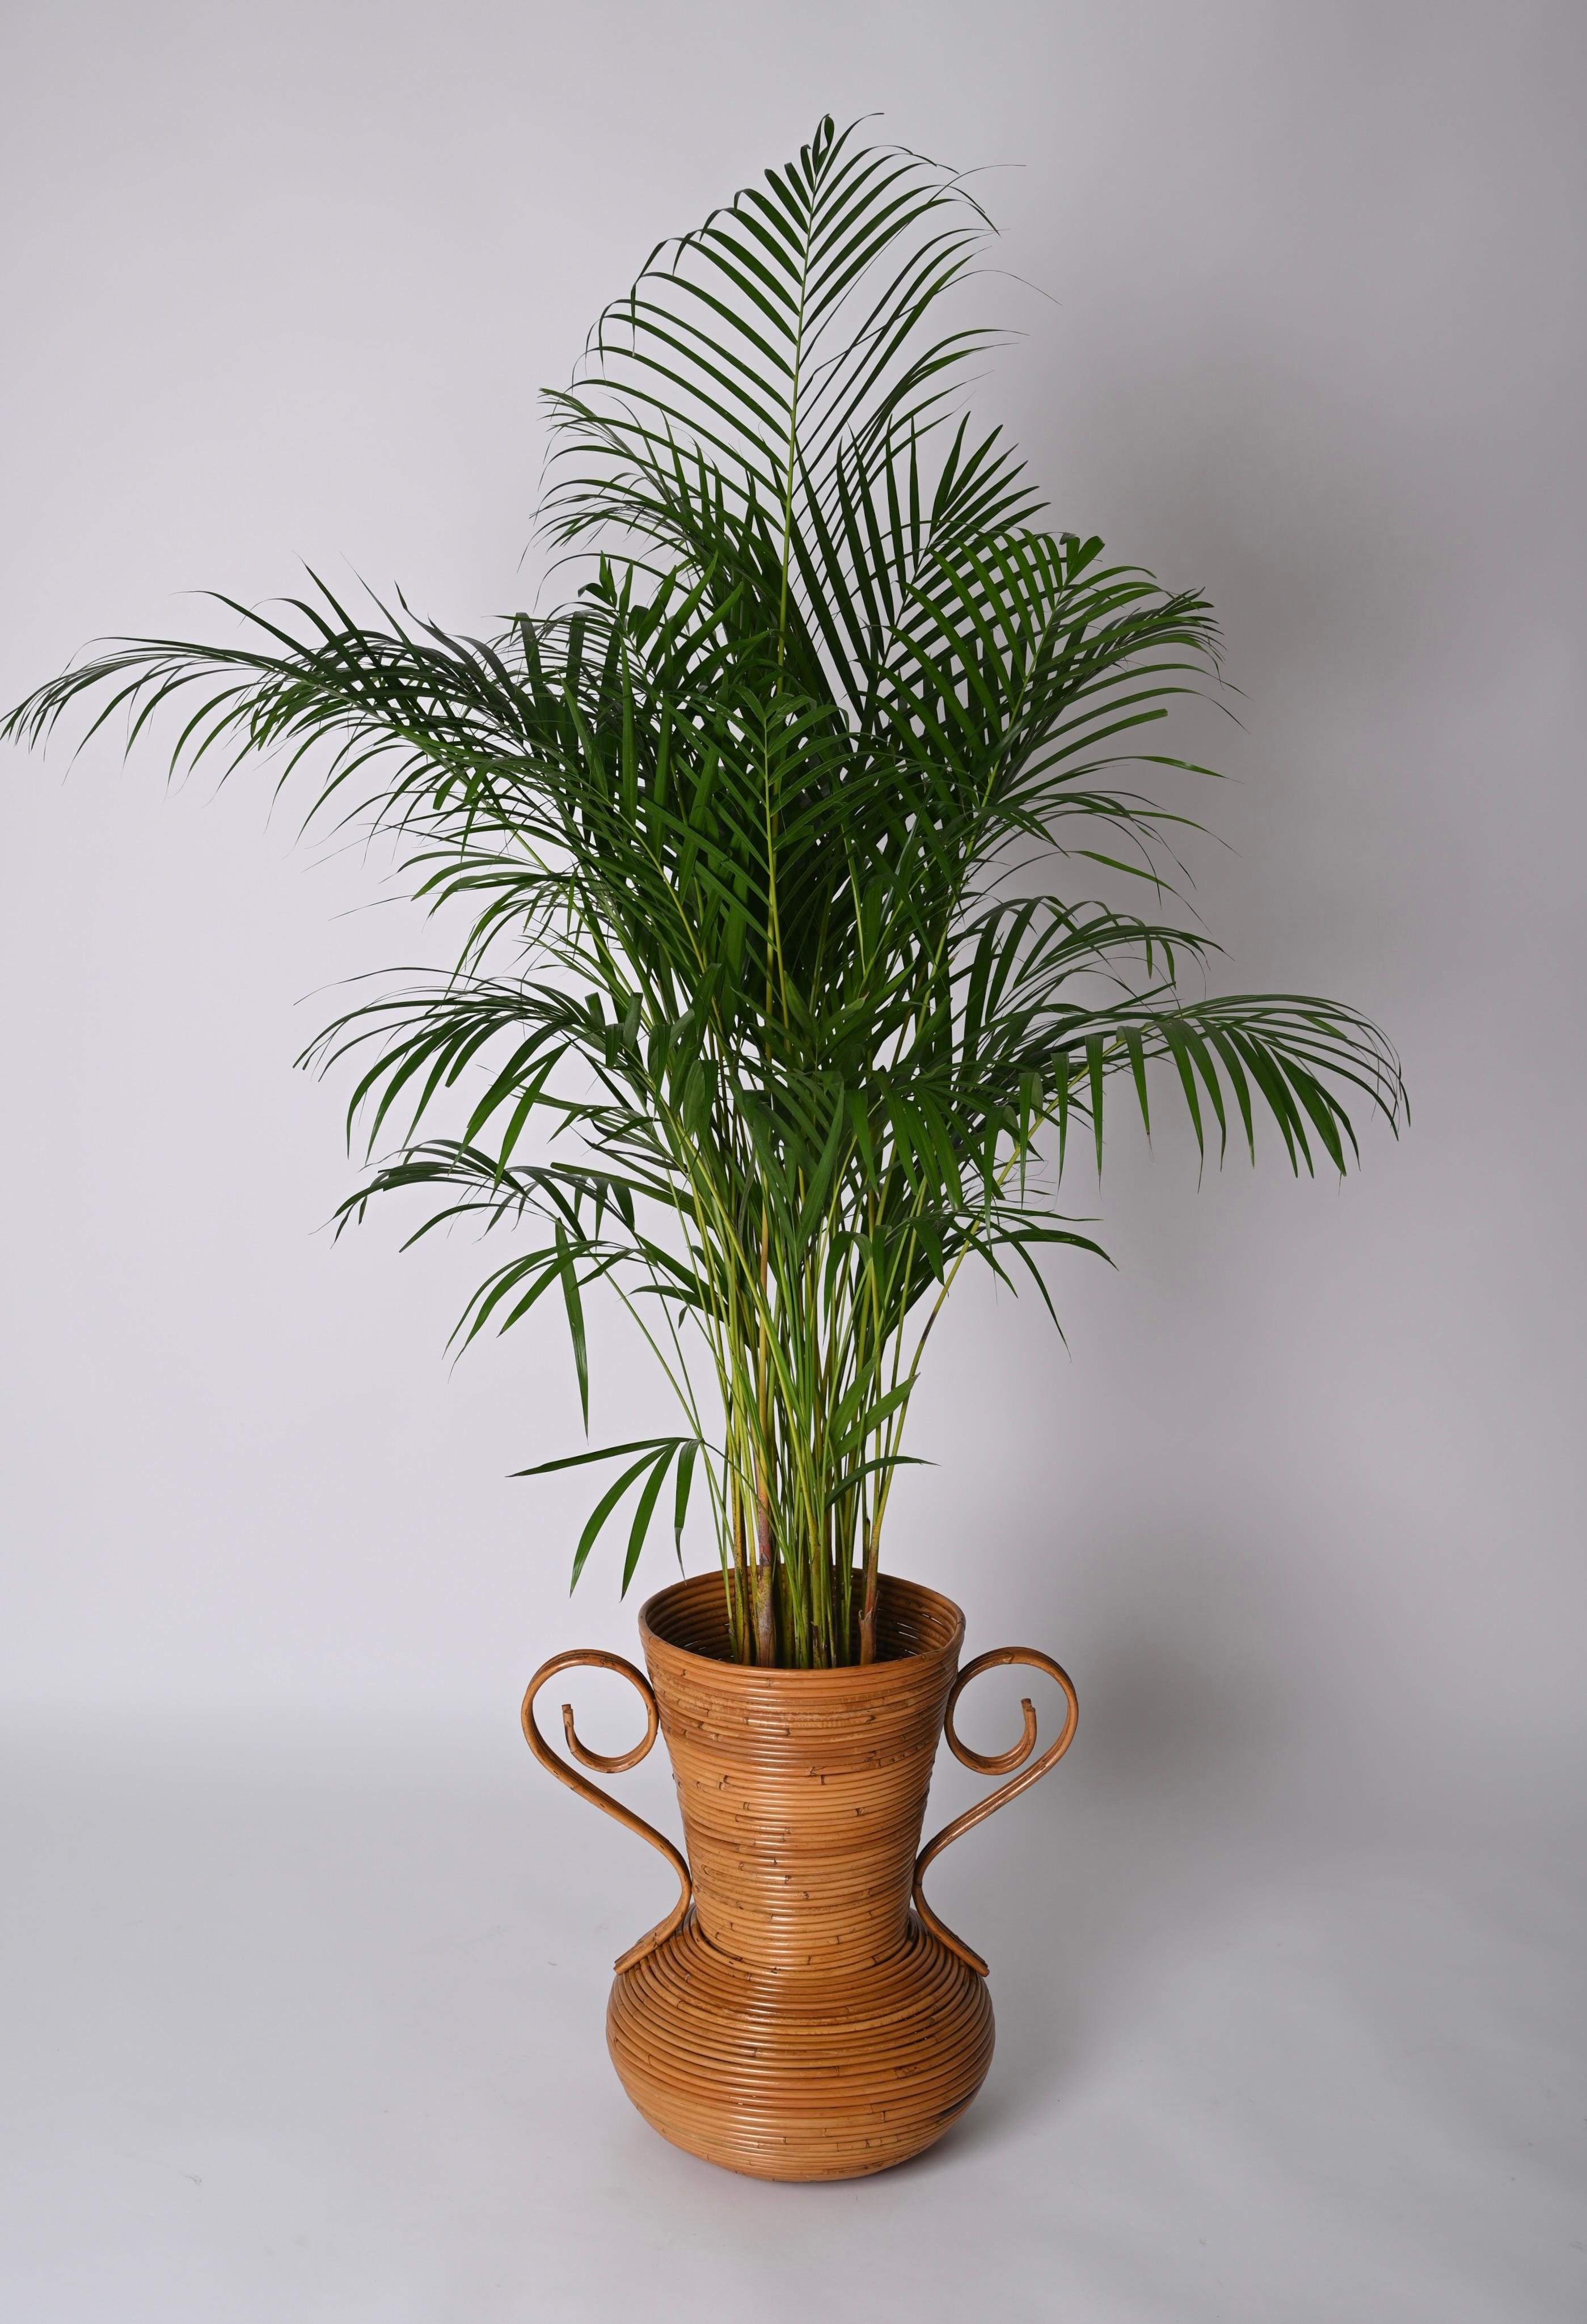 Midcentury Bamboo and Rattan Decorative Vase, by Vivai del Sud, Italy, 1970s For Sale 6